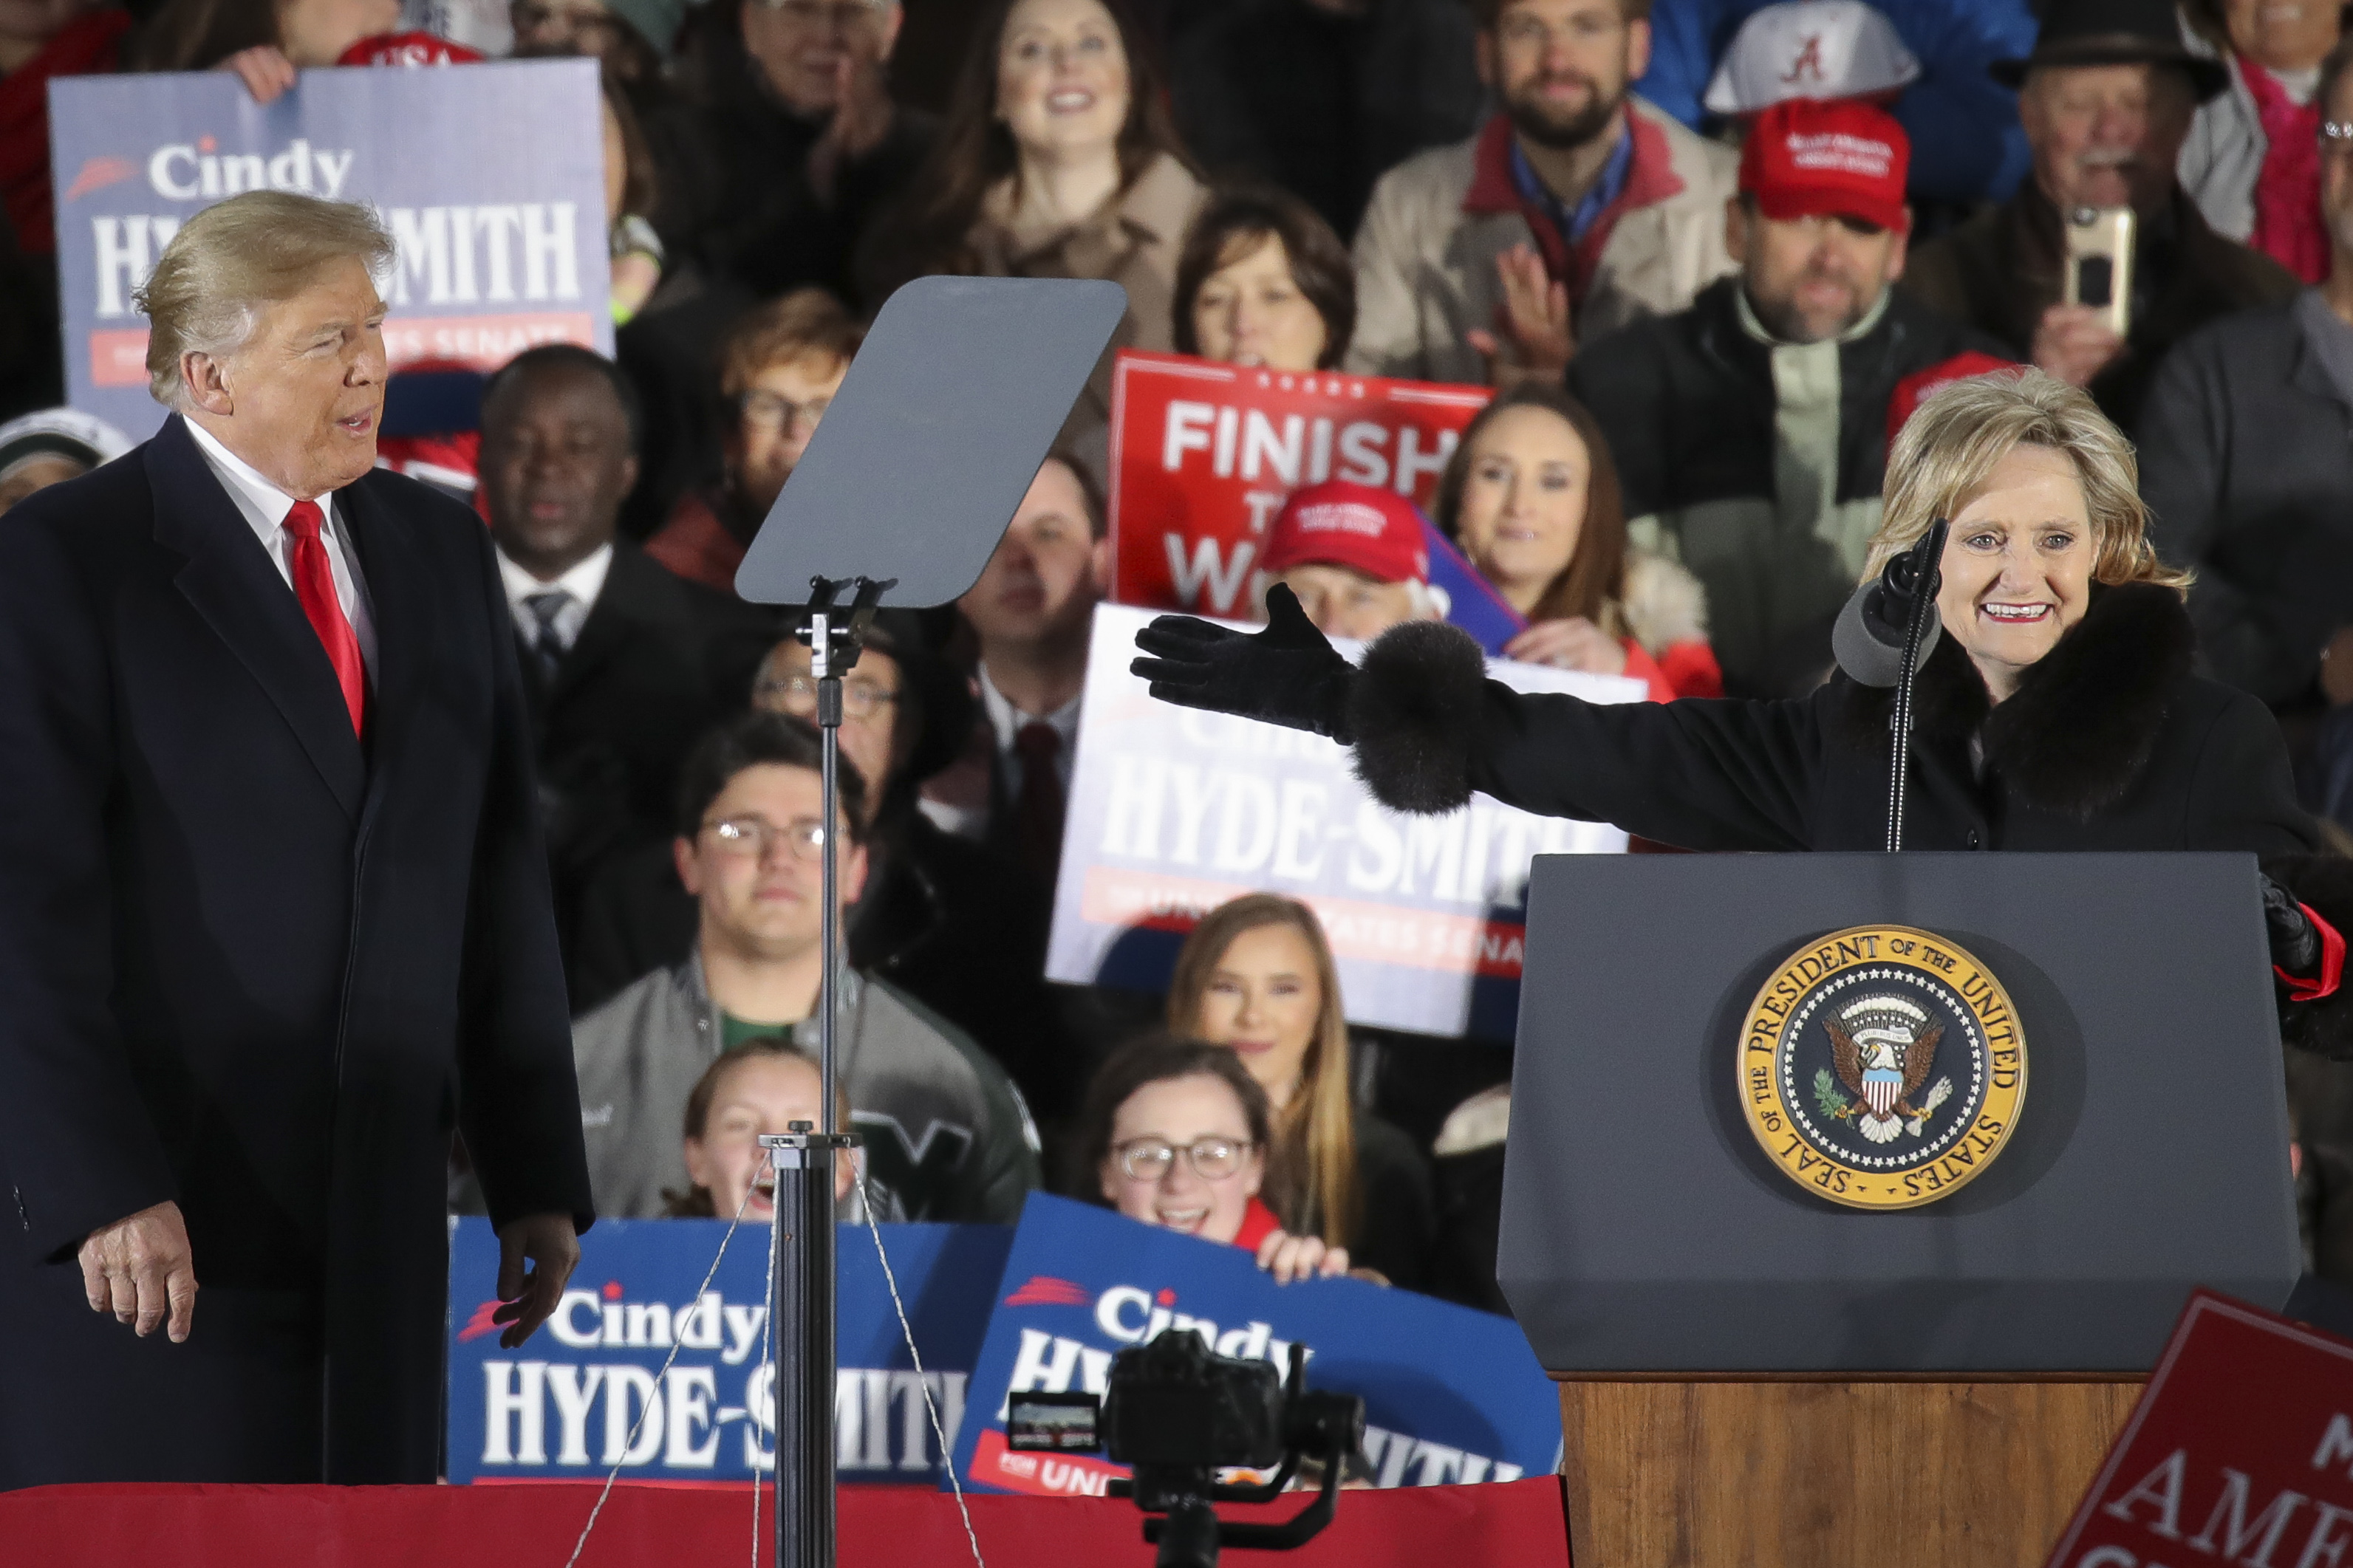 President Donald Trump looks on as Republican candidate for U.S. Senate Cindy Hyde-Smith thanks him during a rally at the Tupelo Regional Airport, November 26, 2018 in Tupelo, Mississippi. (Drew Angerer/Getty Images)